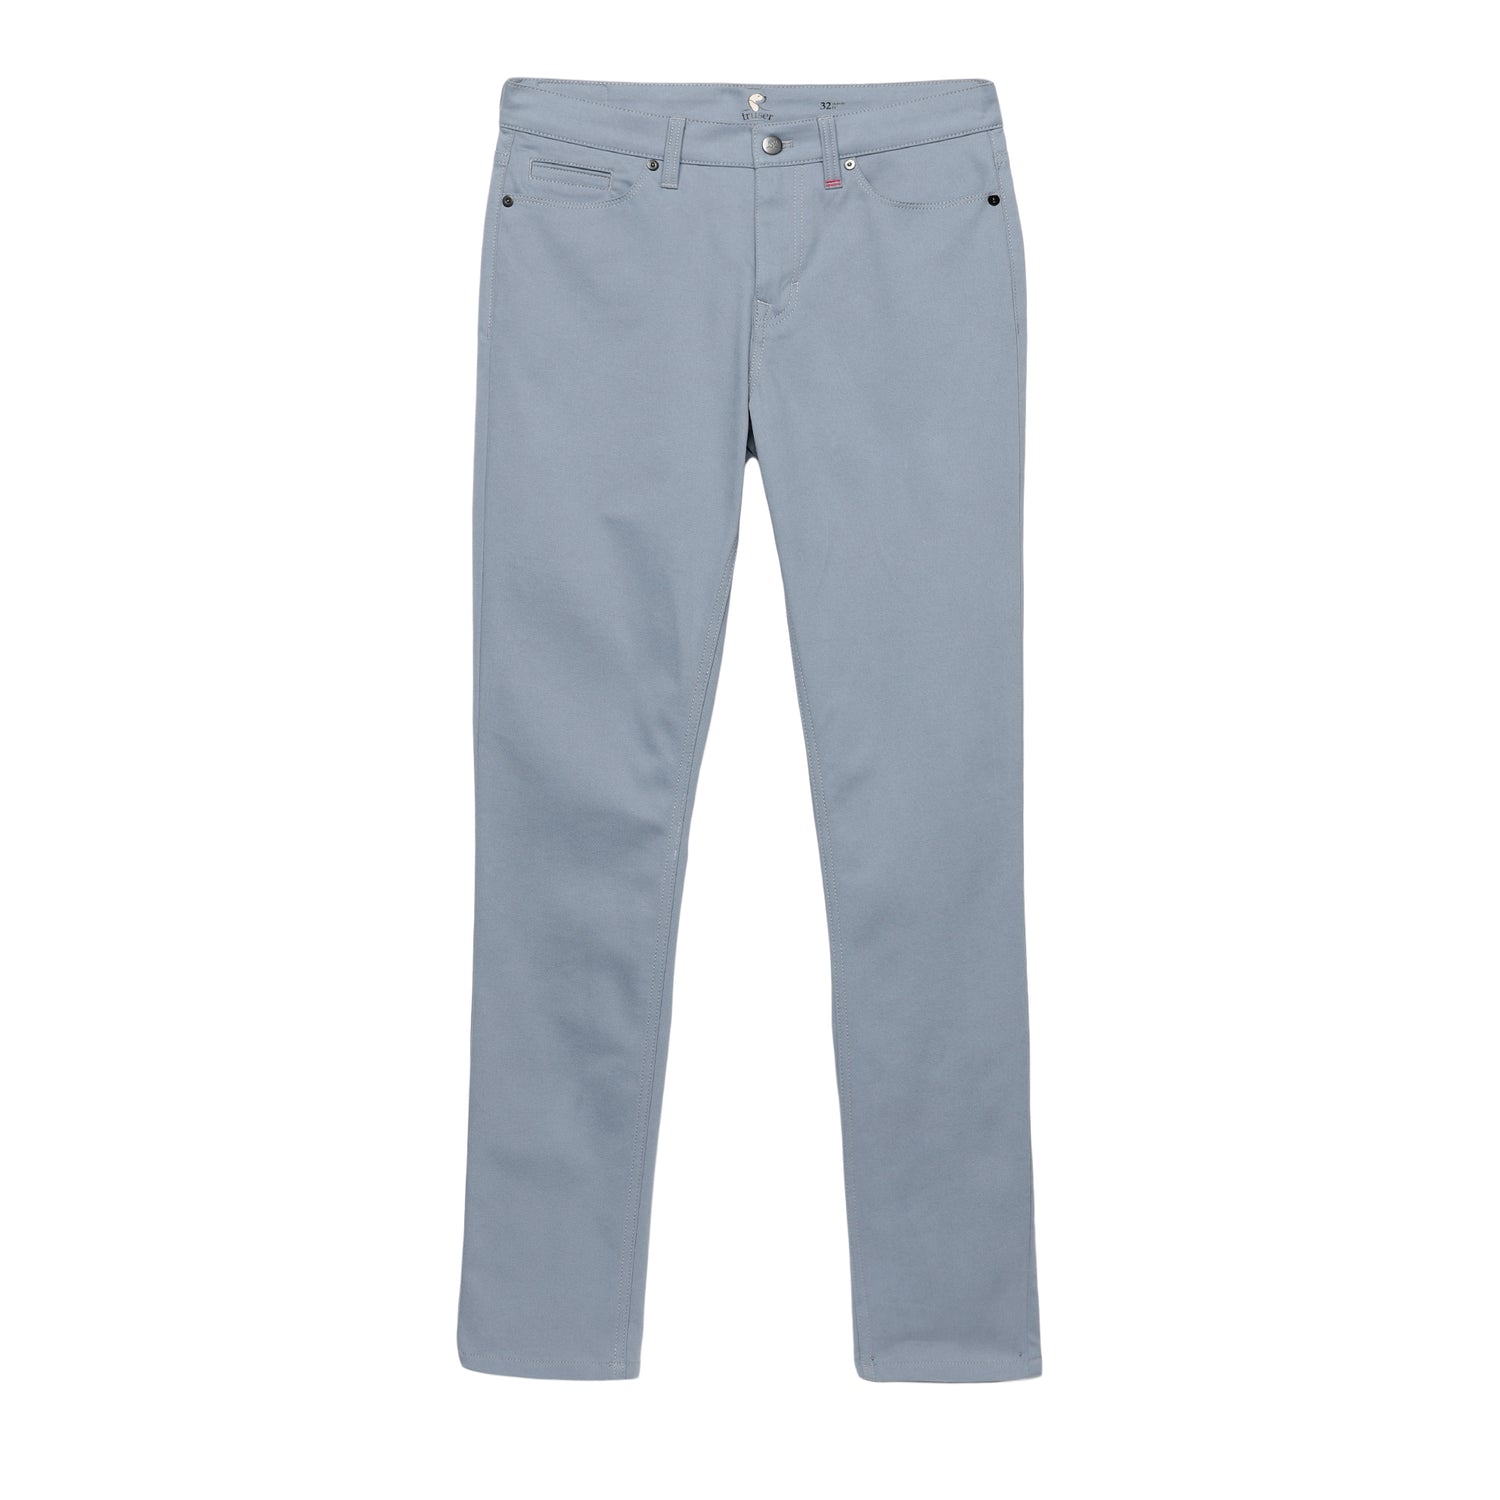 STRAIGHT FIT LUXE FIVE-POCKET PANTS - WASH DENIM